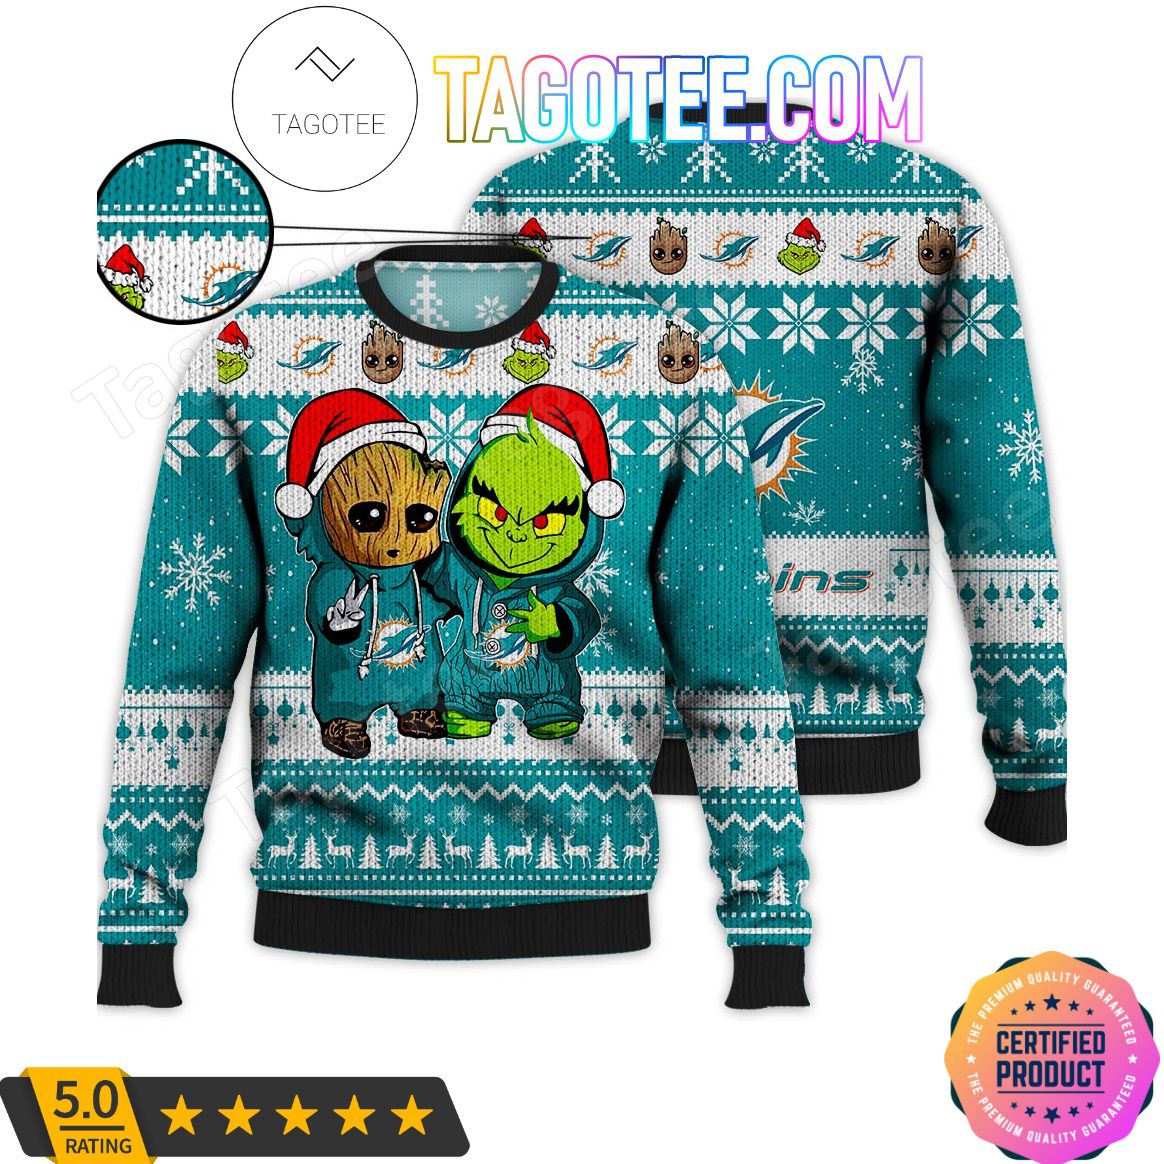 Miami Dolphins Shop - Miami Dolphins Baby Groot And Grinch NFL Fan Knitted Christmas Jumper